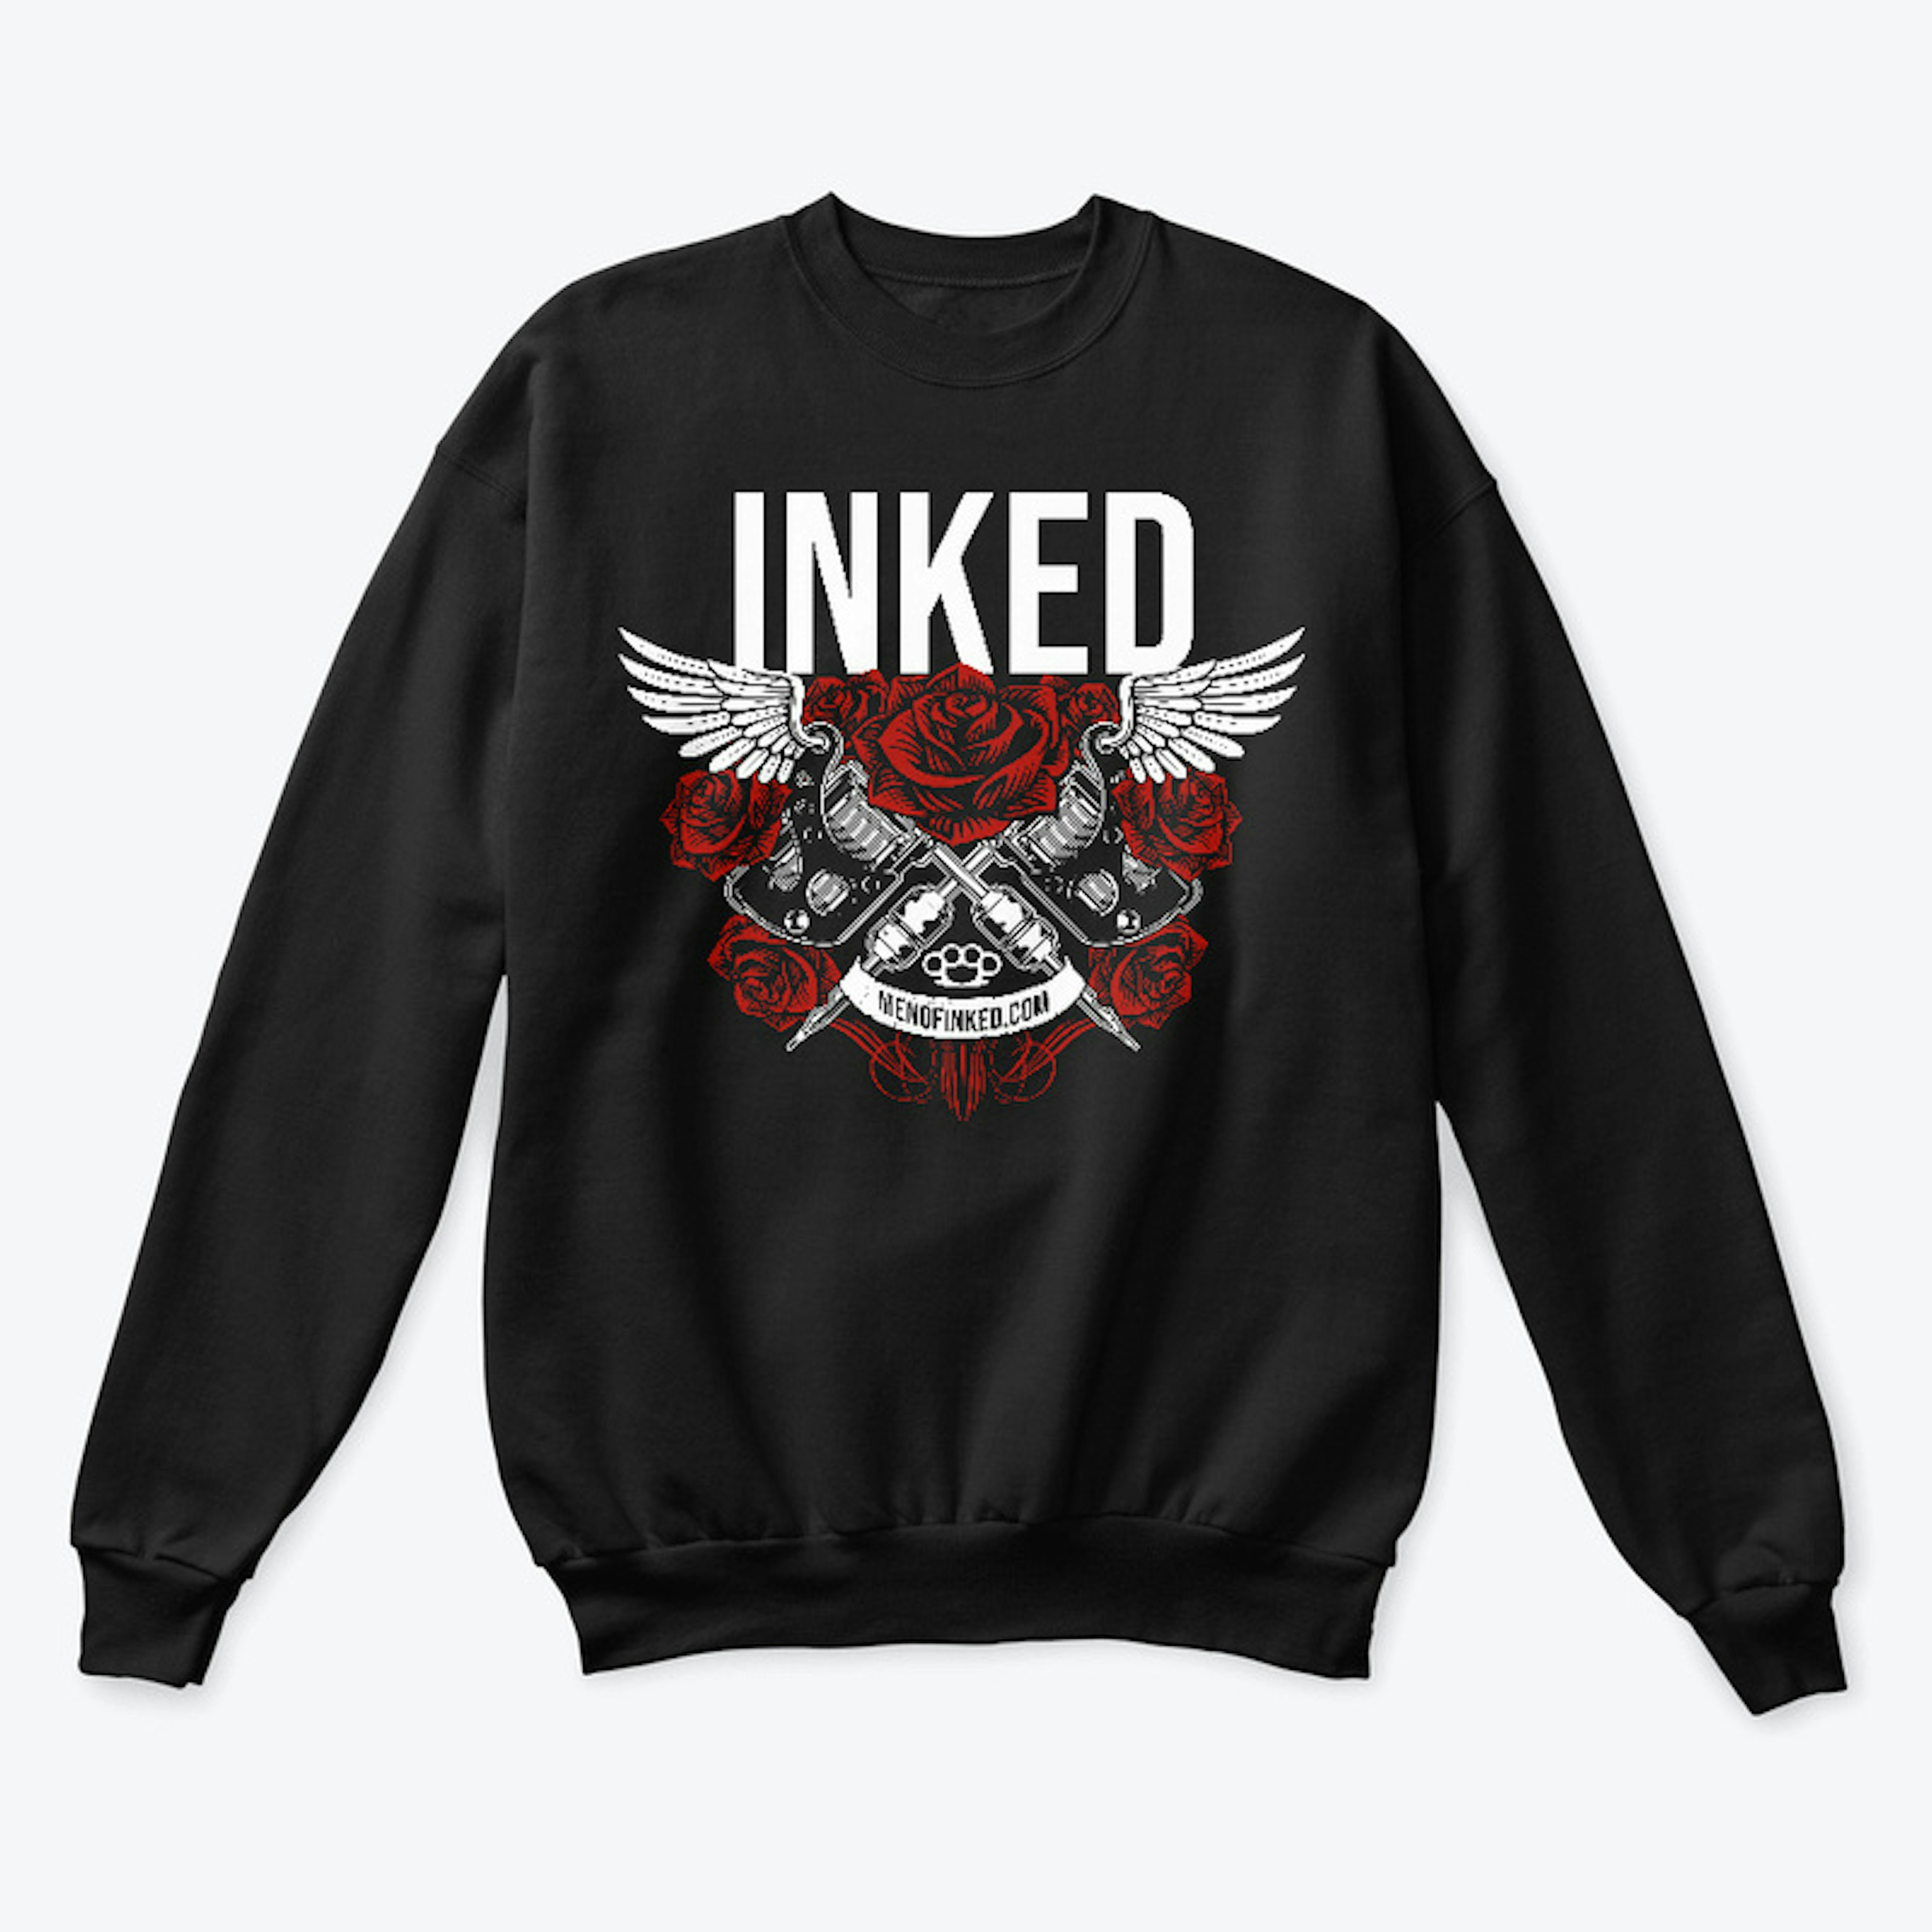 Inked Apparel by Chelle Bliss